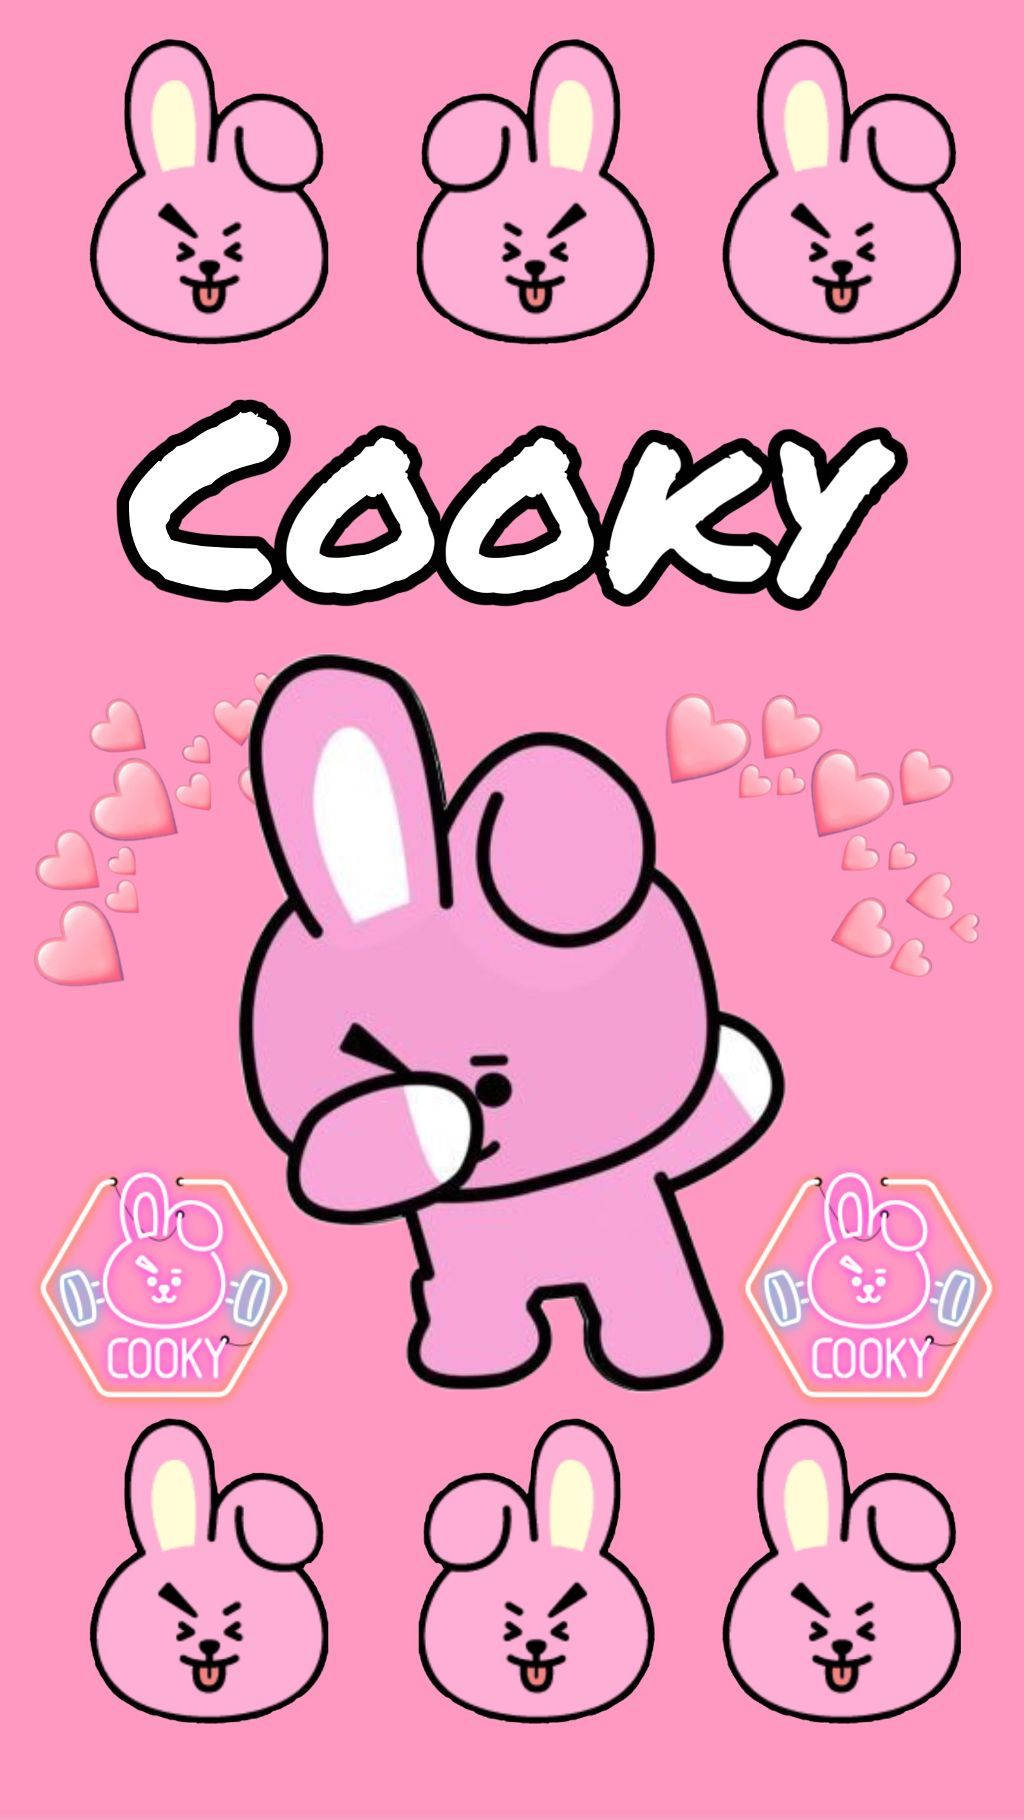 Adorable Cooky BT21 in a Dab Pose Wallpaper